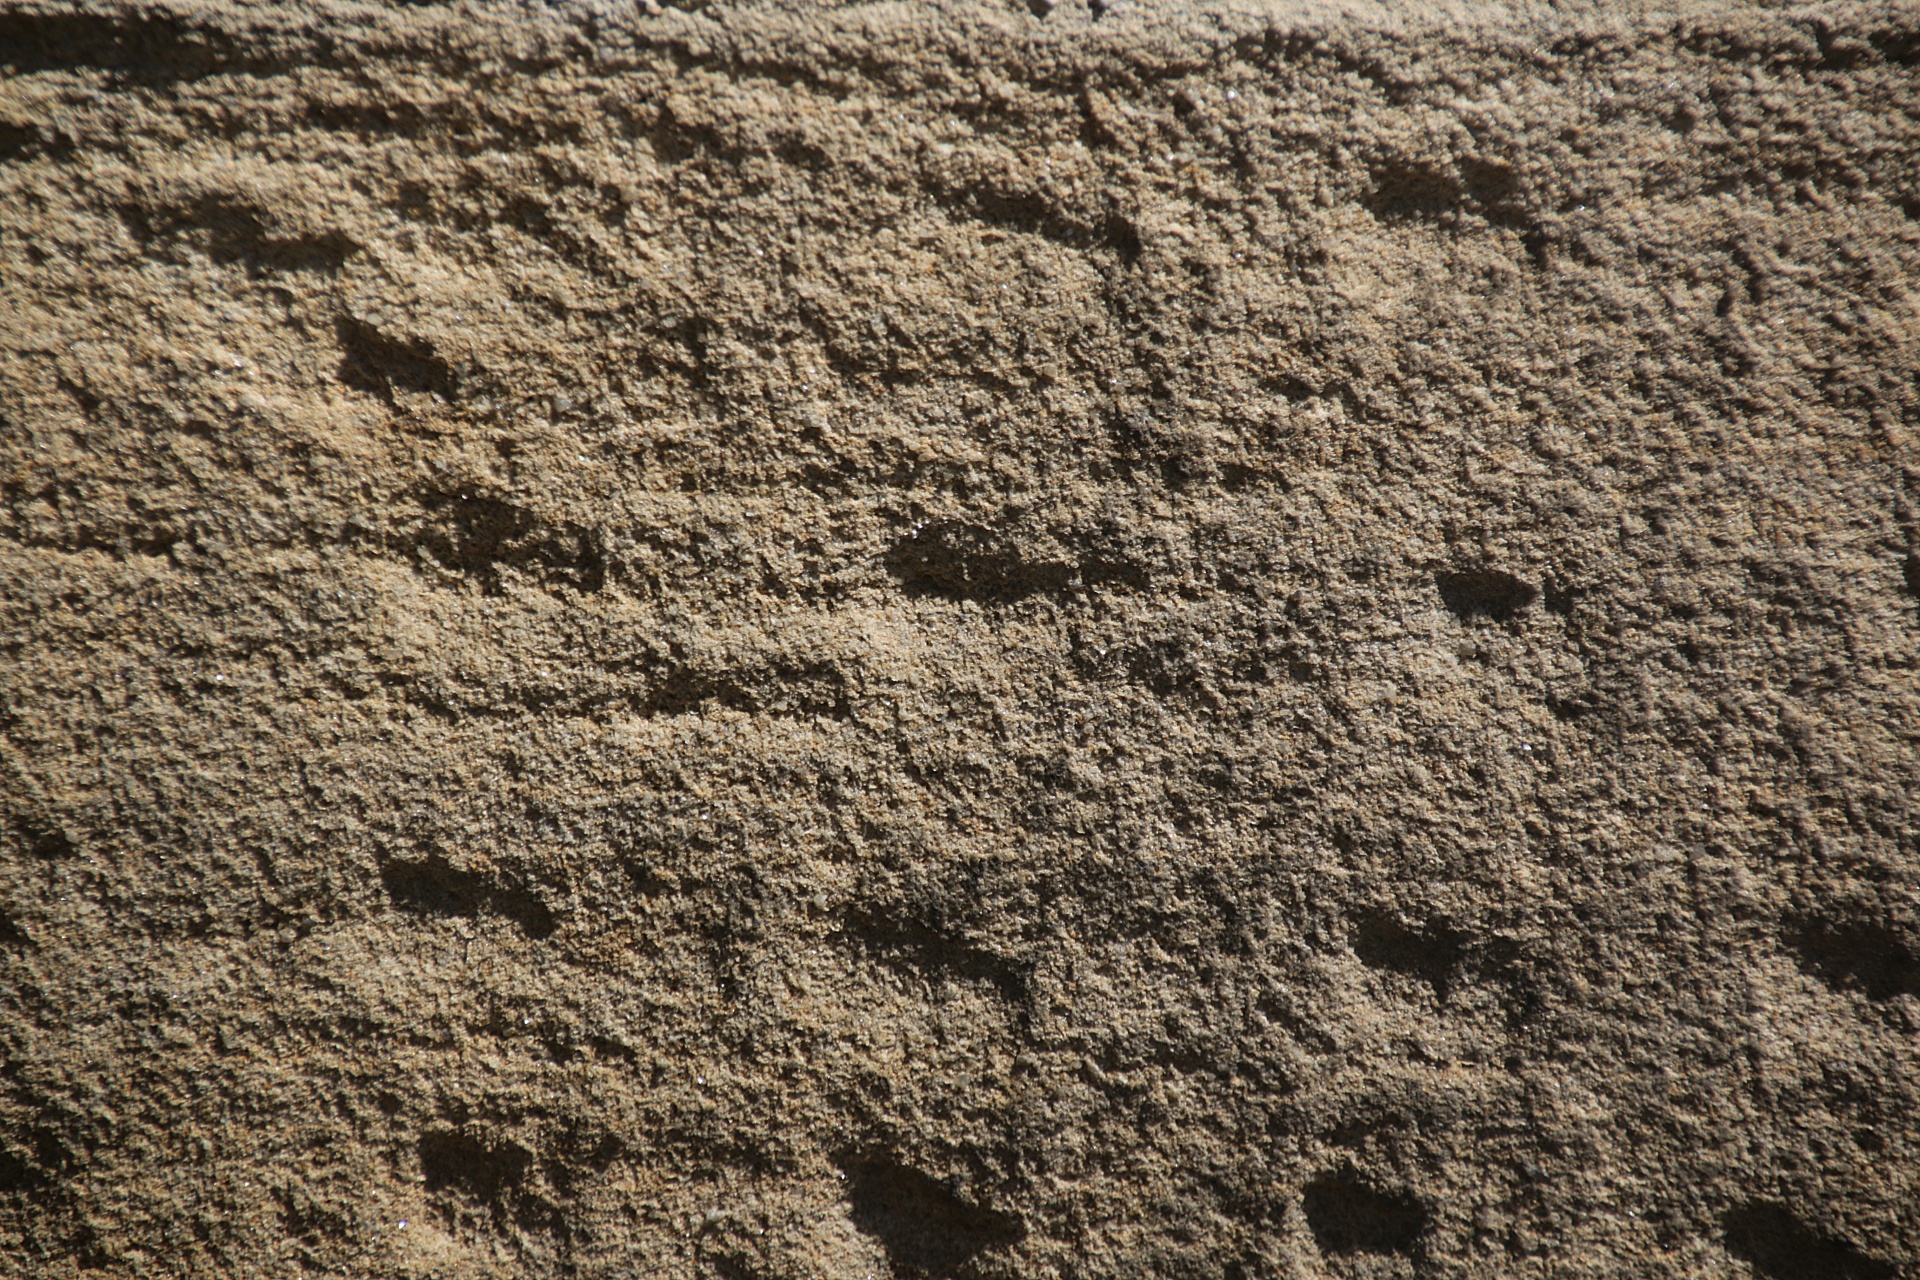 Dressed stonework in wall